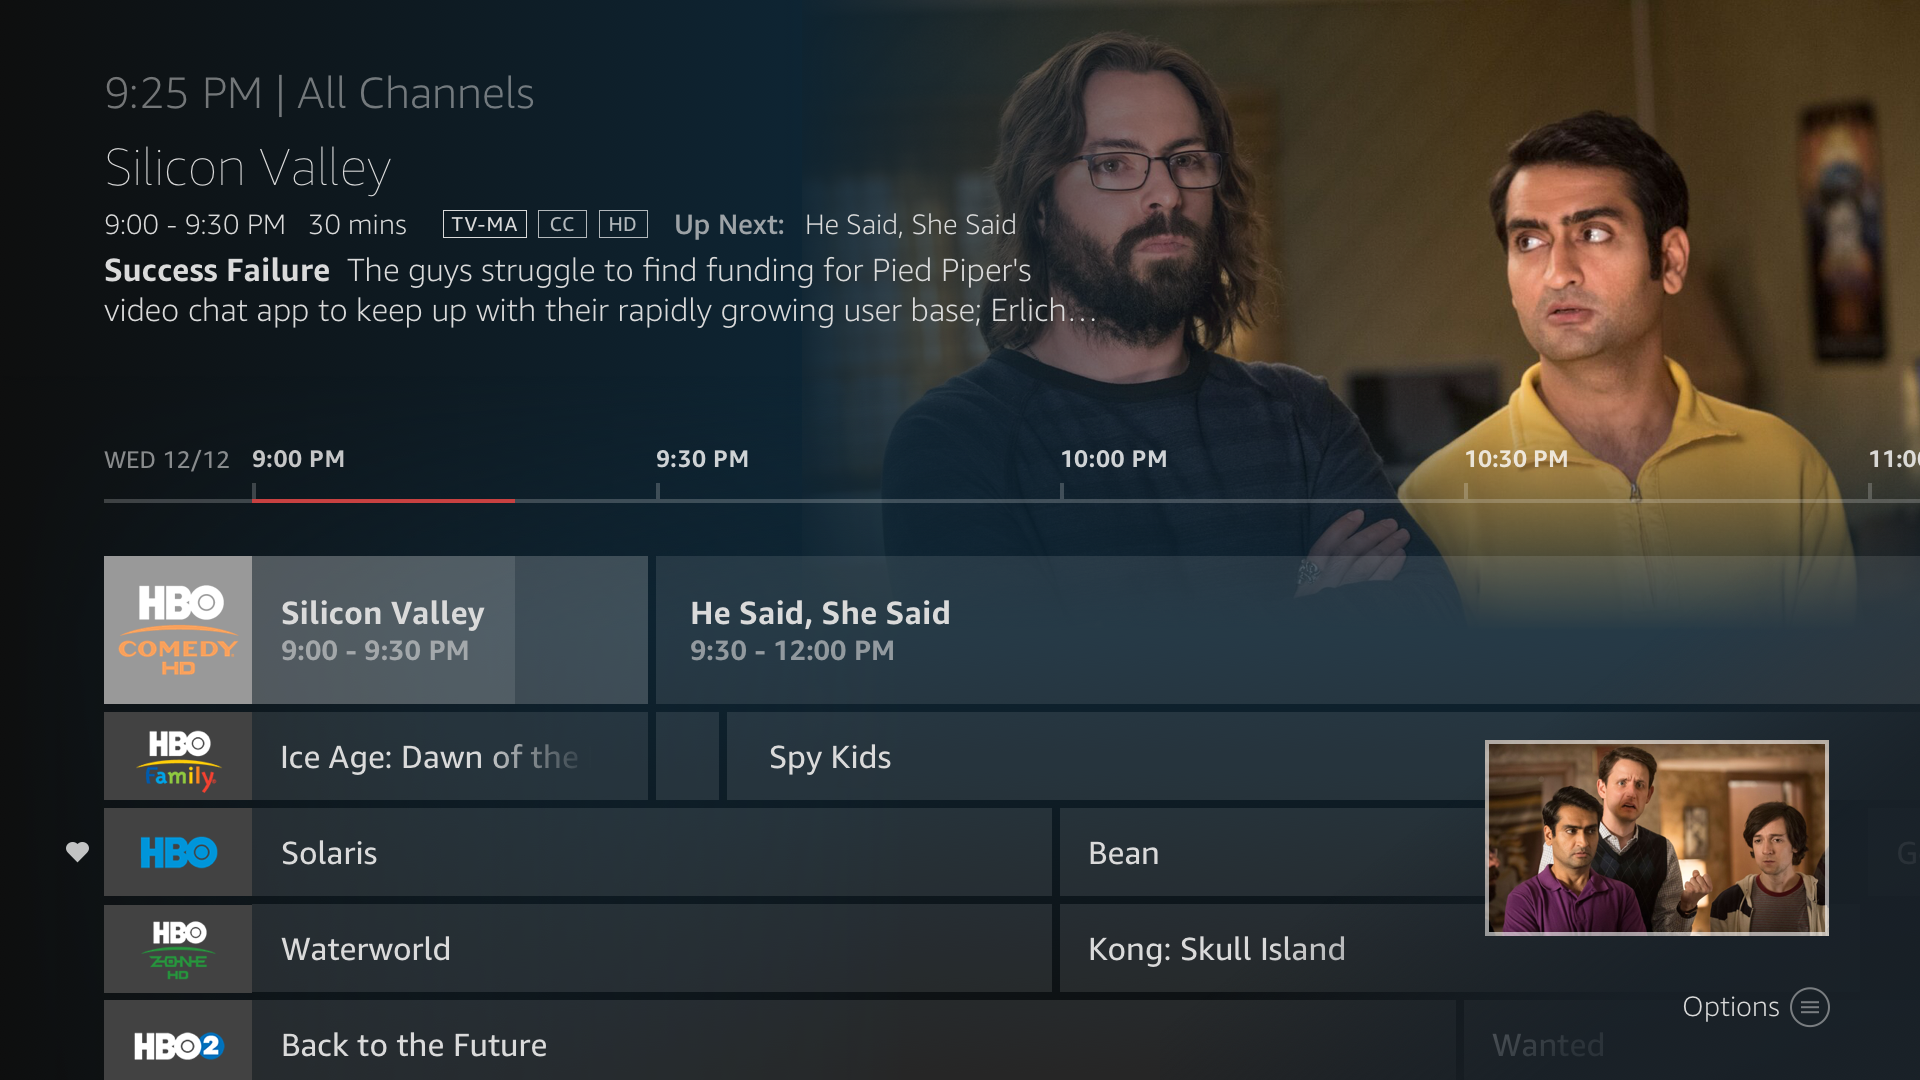 Live TV has a new home on Fire TV - Amazon Fire TV